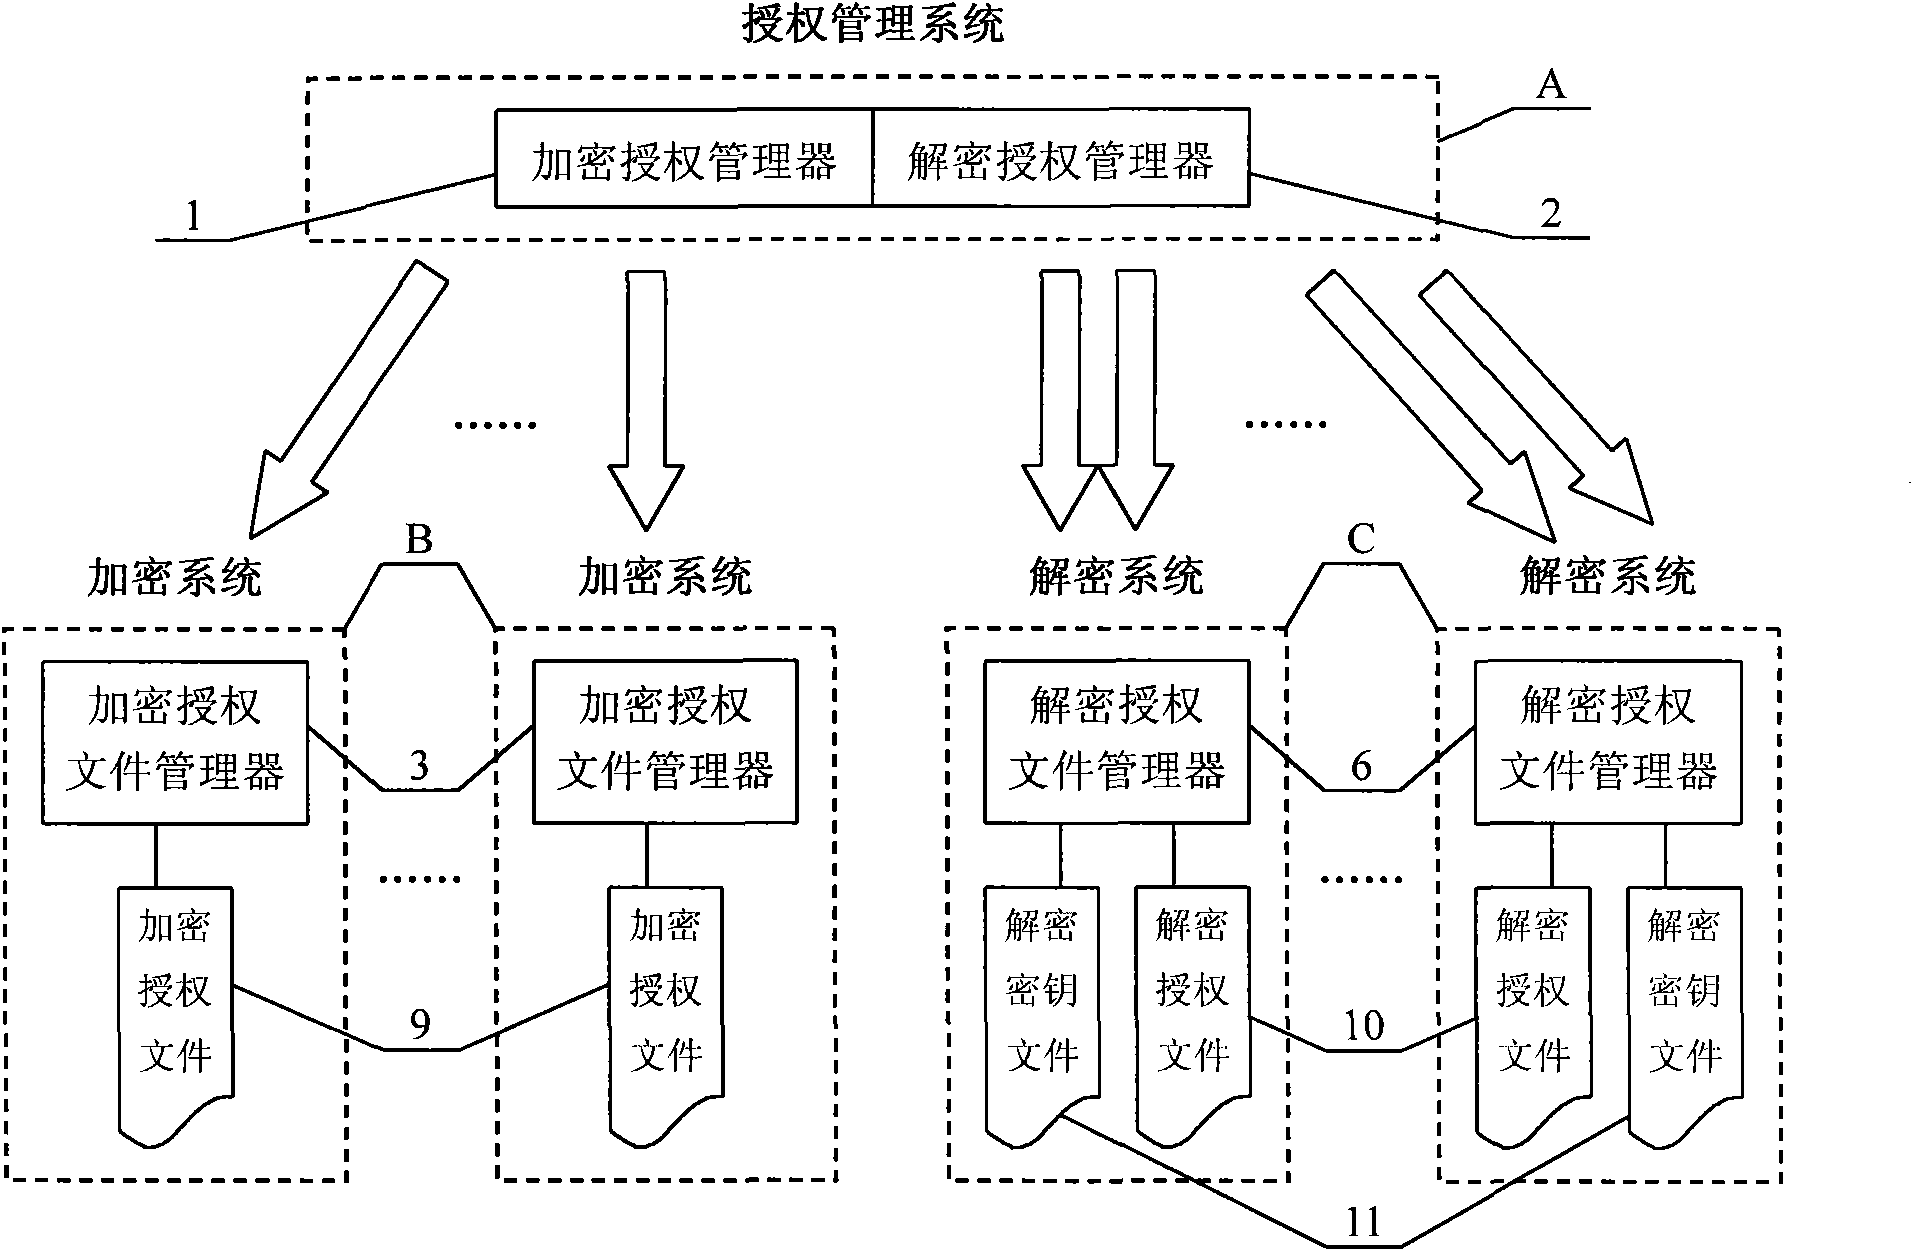 Information protection method and management system thereof for unconnected system